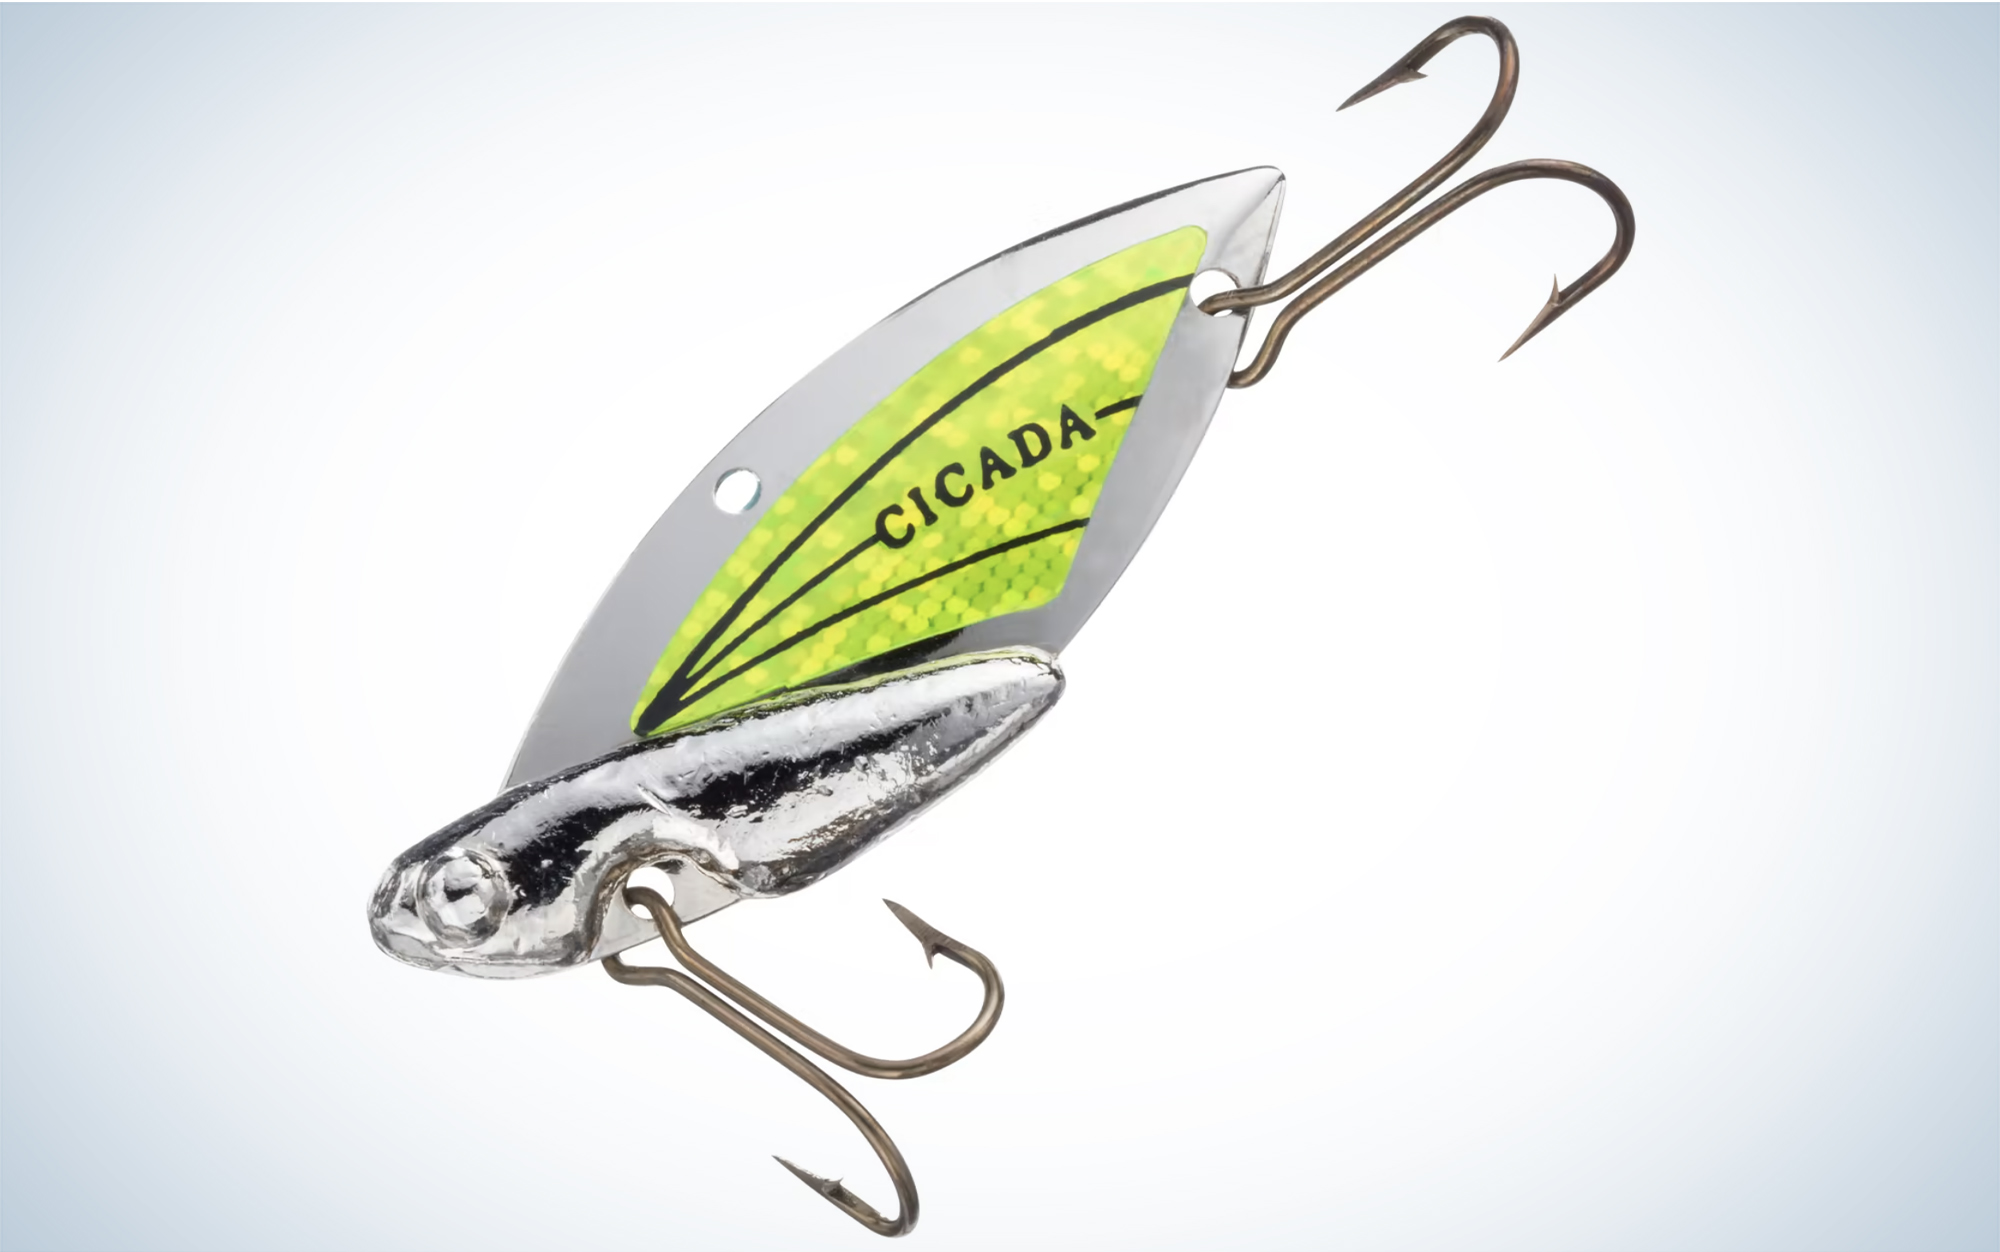 The Reef Runner Cicada is one of the best walleye ice fishing lures.